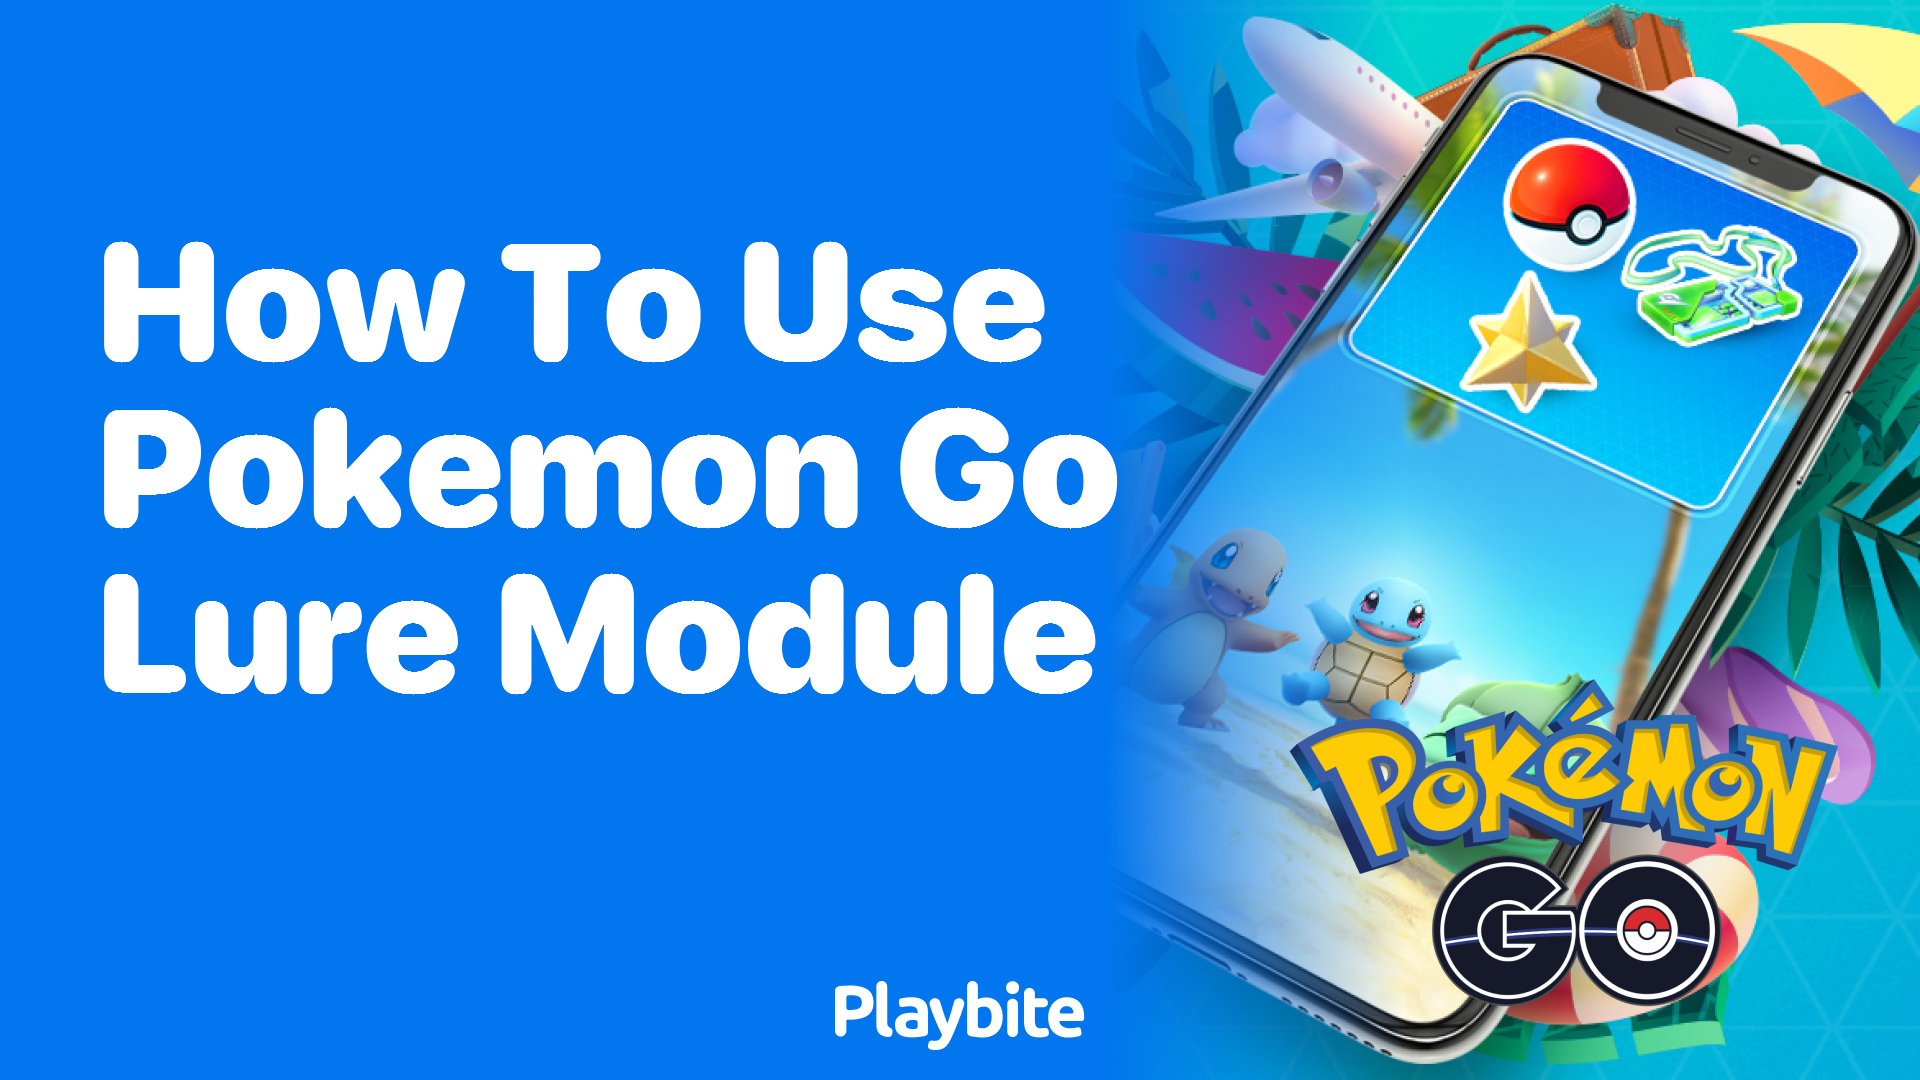 How to Use Pokemon GO Lure Module Effectively - Playbite